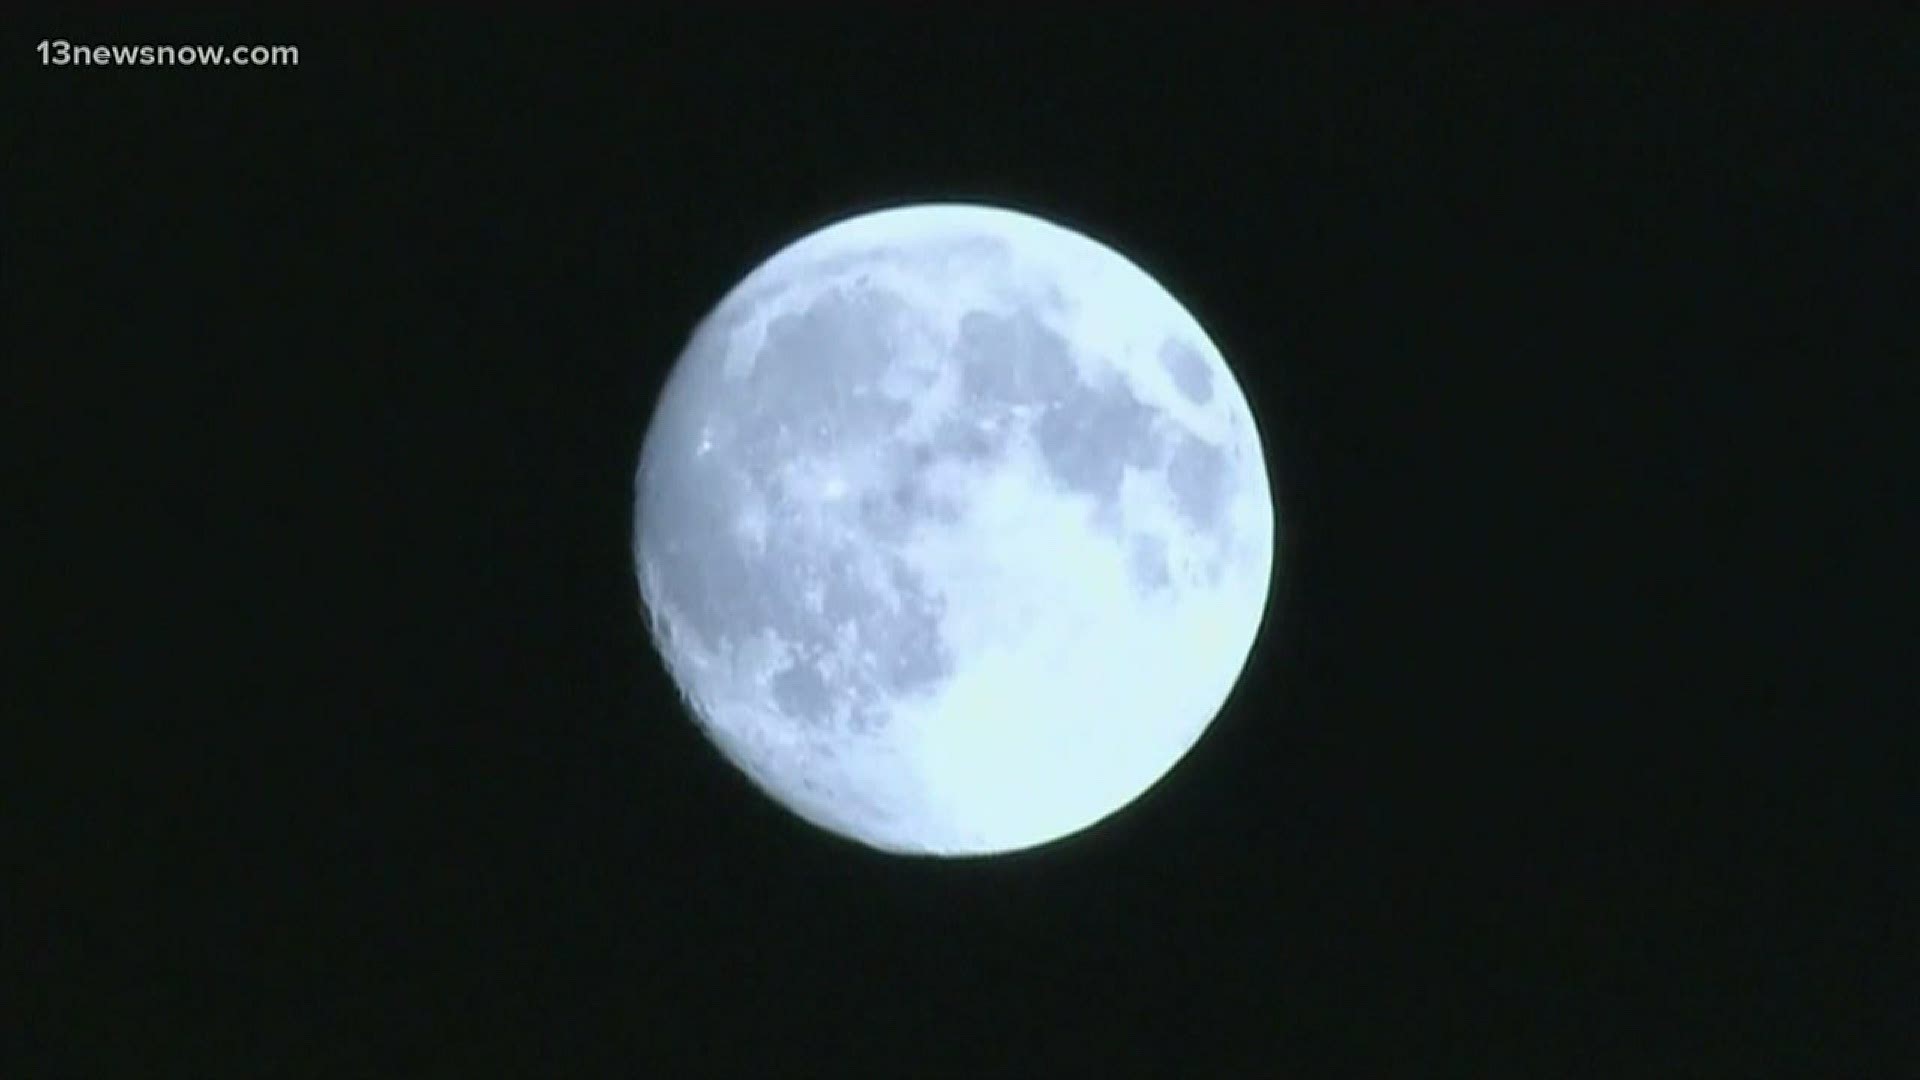 Tonight's Super Moon and what to look for in the sky in Hampton Roads. It's the final Super Moon of 2020.